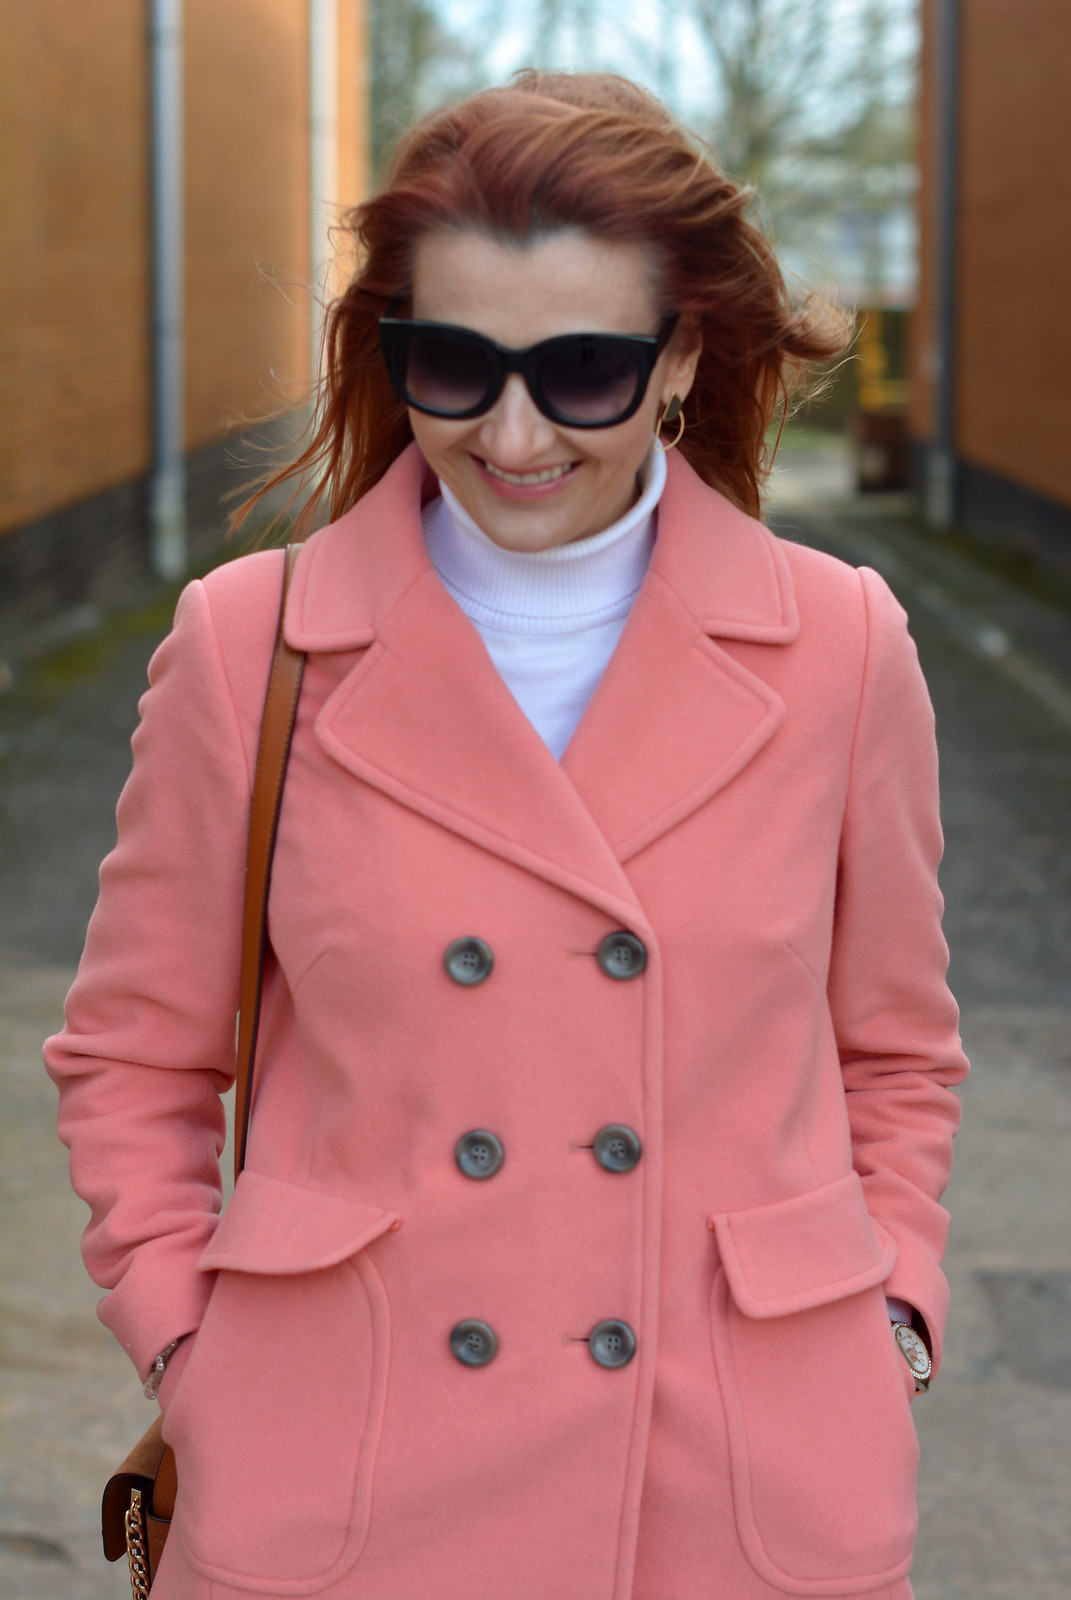 Winter style: Peach coat with white roll neck | Not Dressed As Lamb